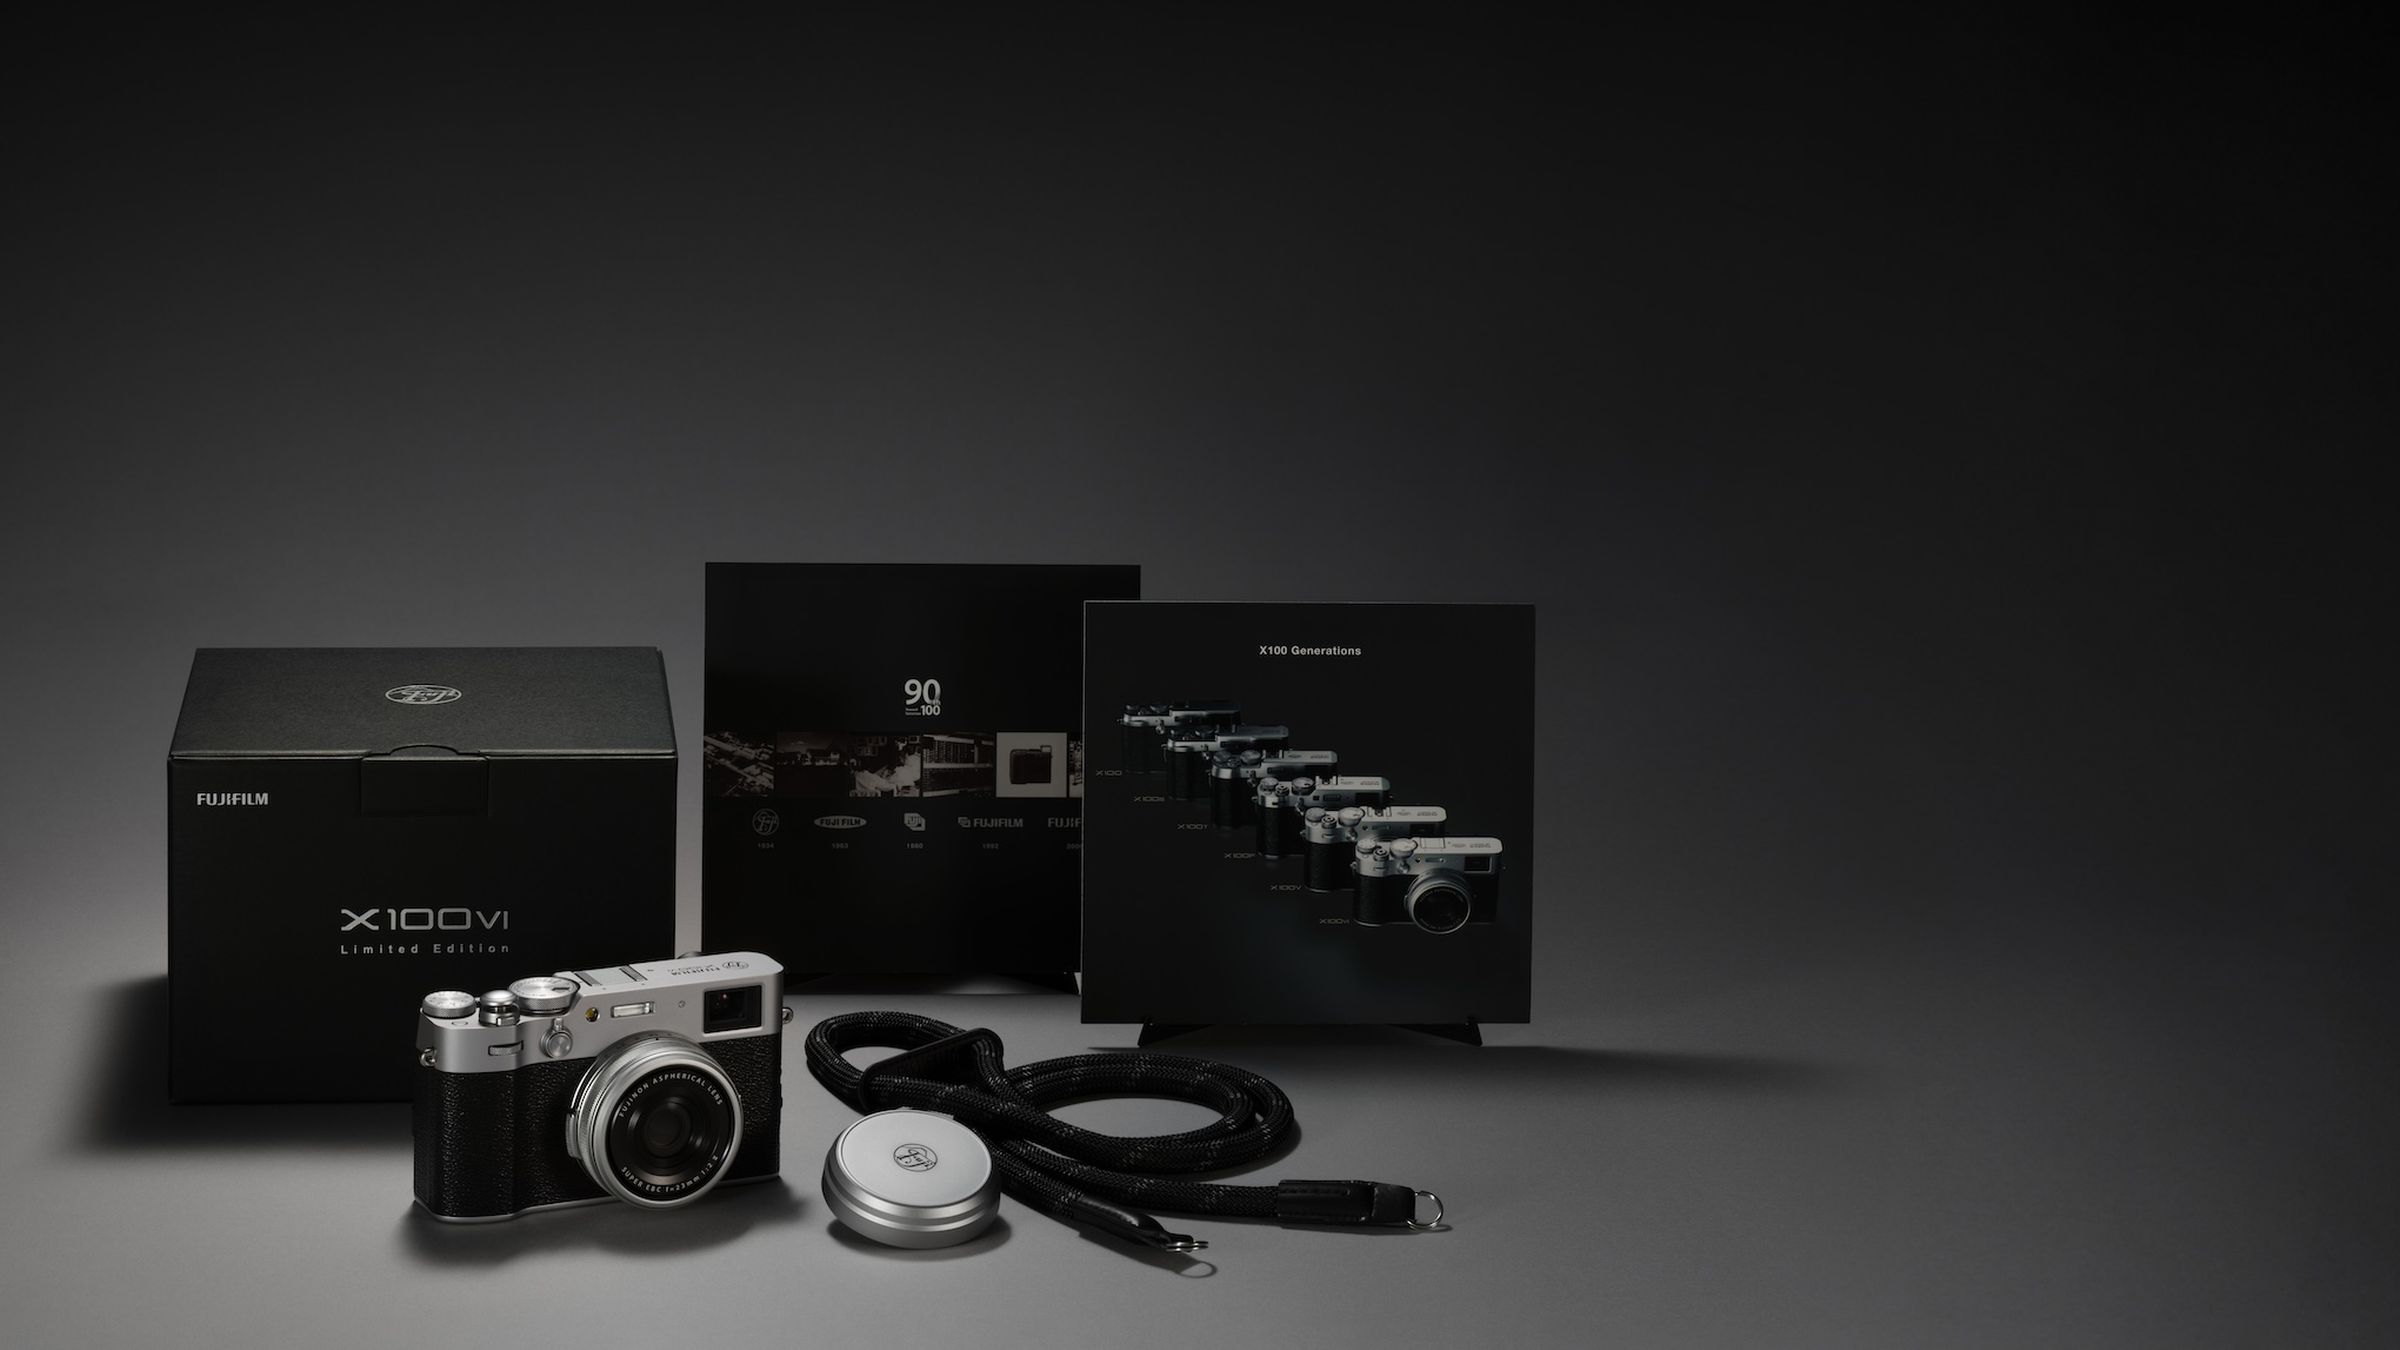 A marketing image of Fujifilm’s Limited Edition X100VI camera and exclusive accessories.